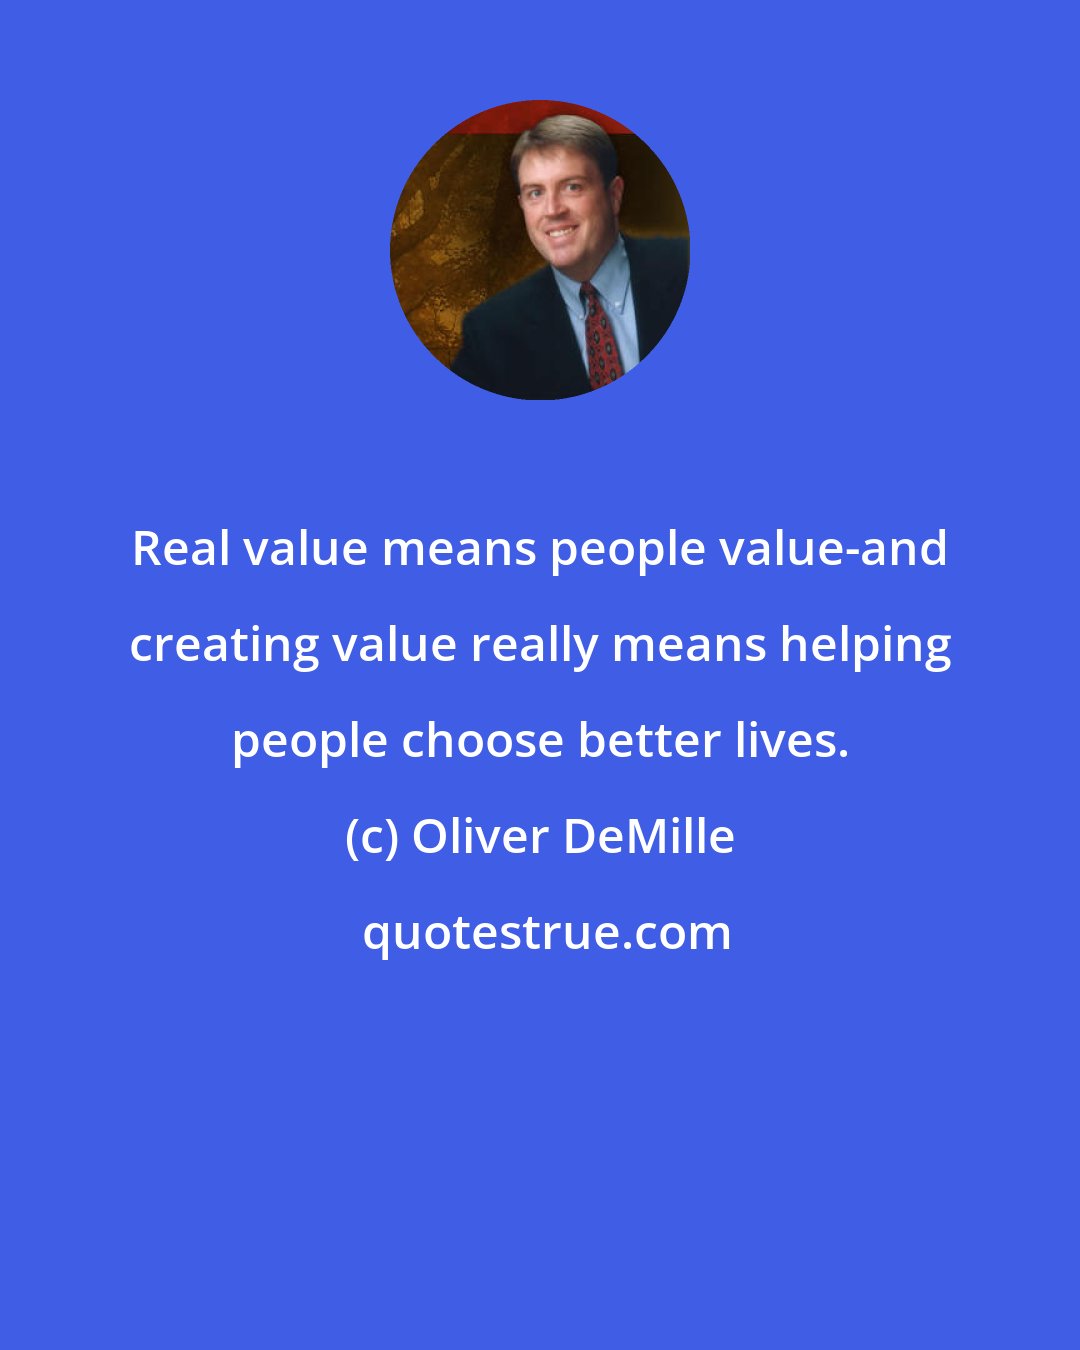 Oliver DeMille: Real value means people value-and creating value really means helping people choose better lives.